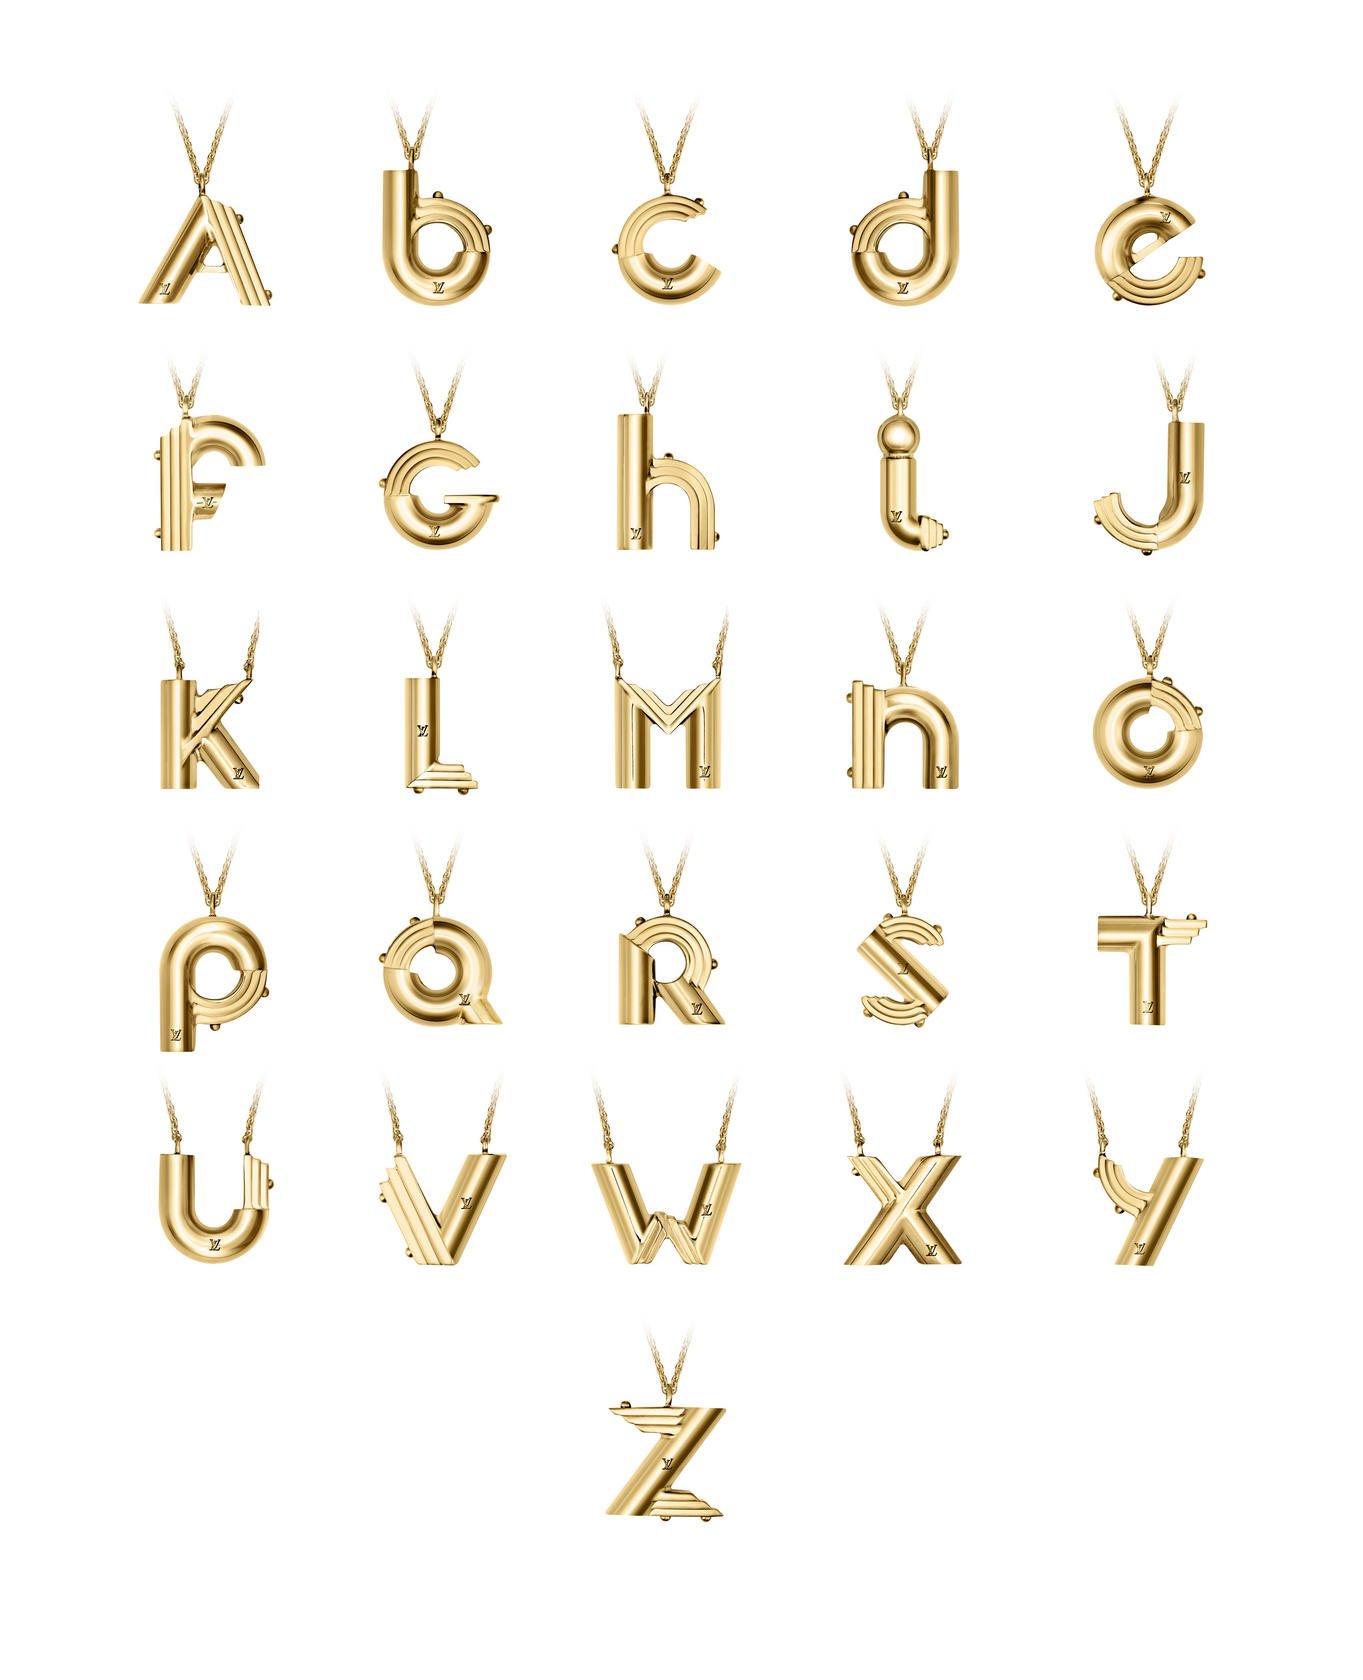 Learning the Louis Vuitton alphabet